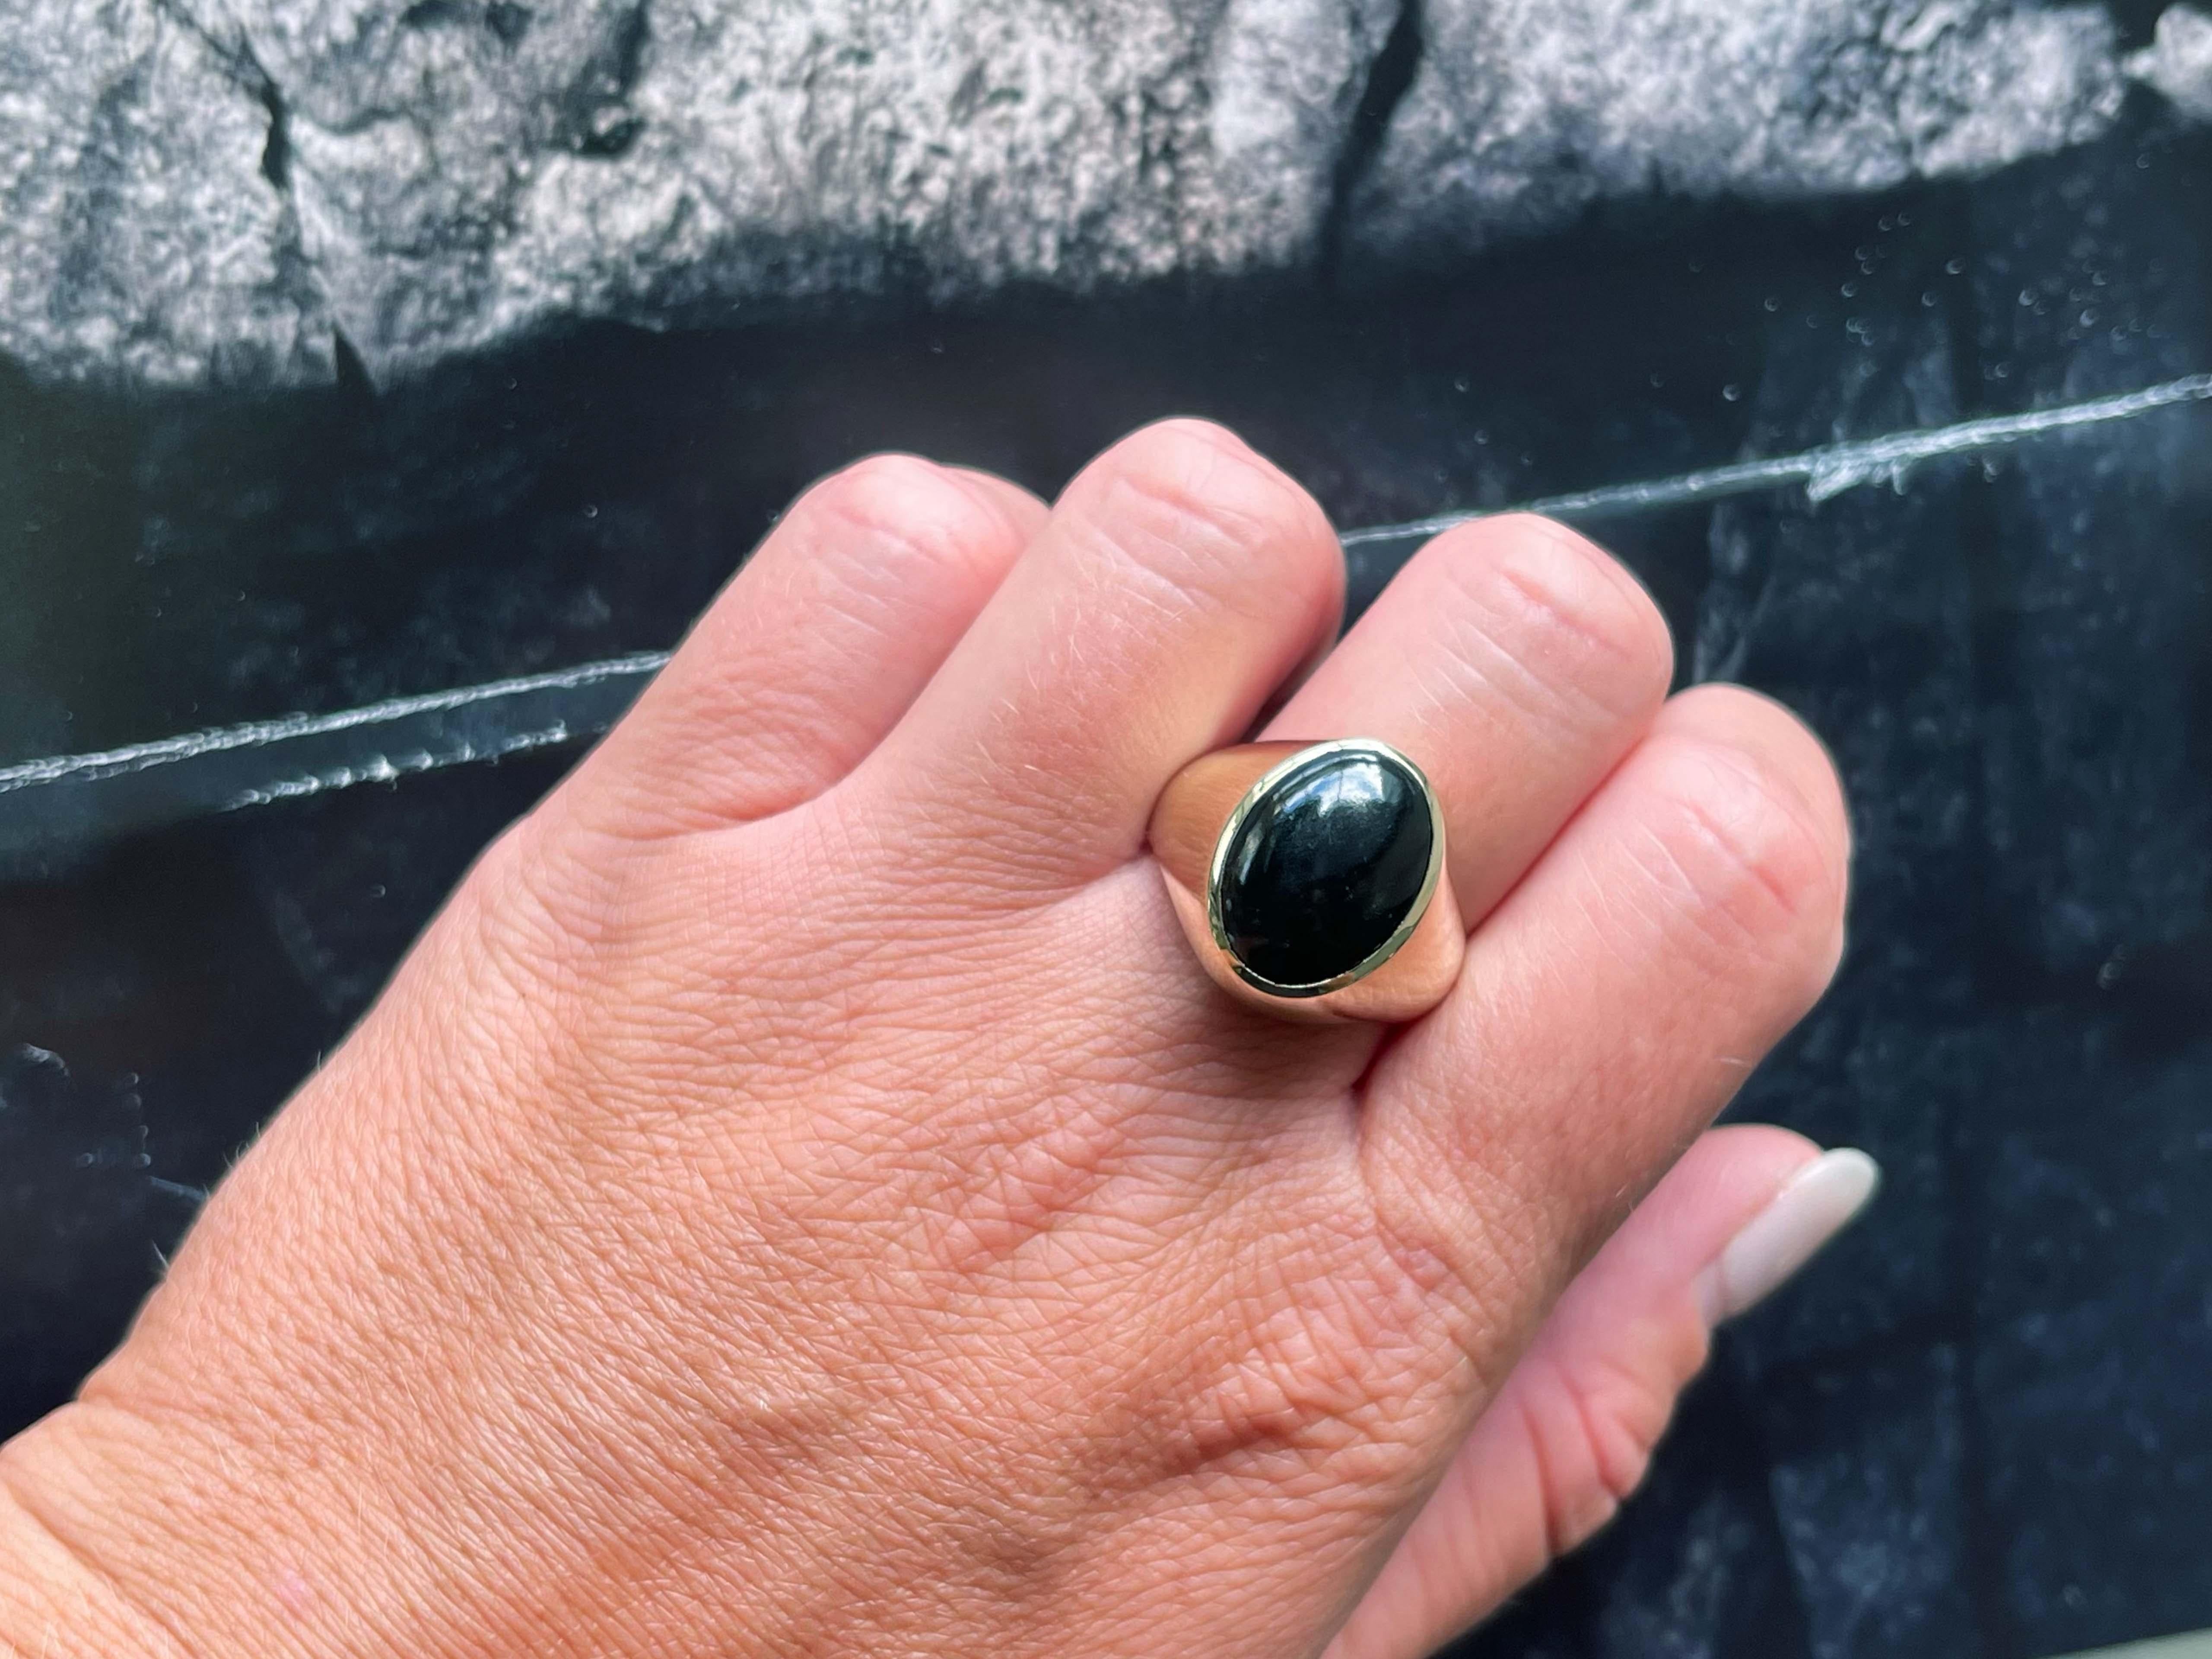 Item Specifications:

Metal: 14K Yellow Gold

Style: Statement Ring

Ring Size: 11 (resizing available for a fee)

Total Weight: 10.3 Grams

Gemstone Specifications:

Center Gemstone: Onyx

Shape: Oval

Color: Black

Cut: Oval Cabochon 

Gemstone